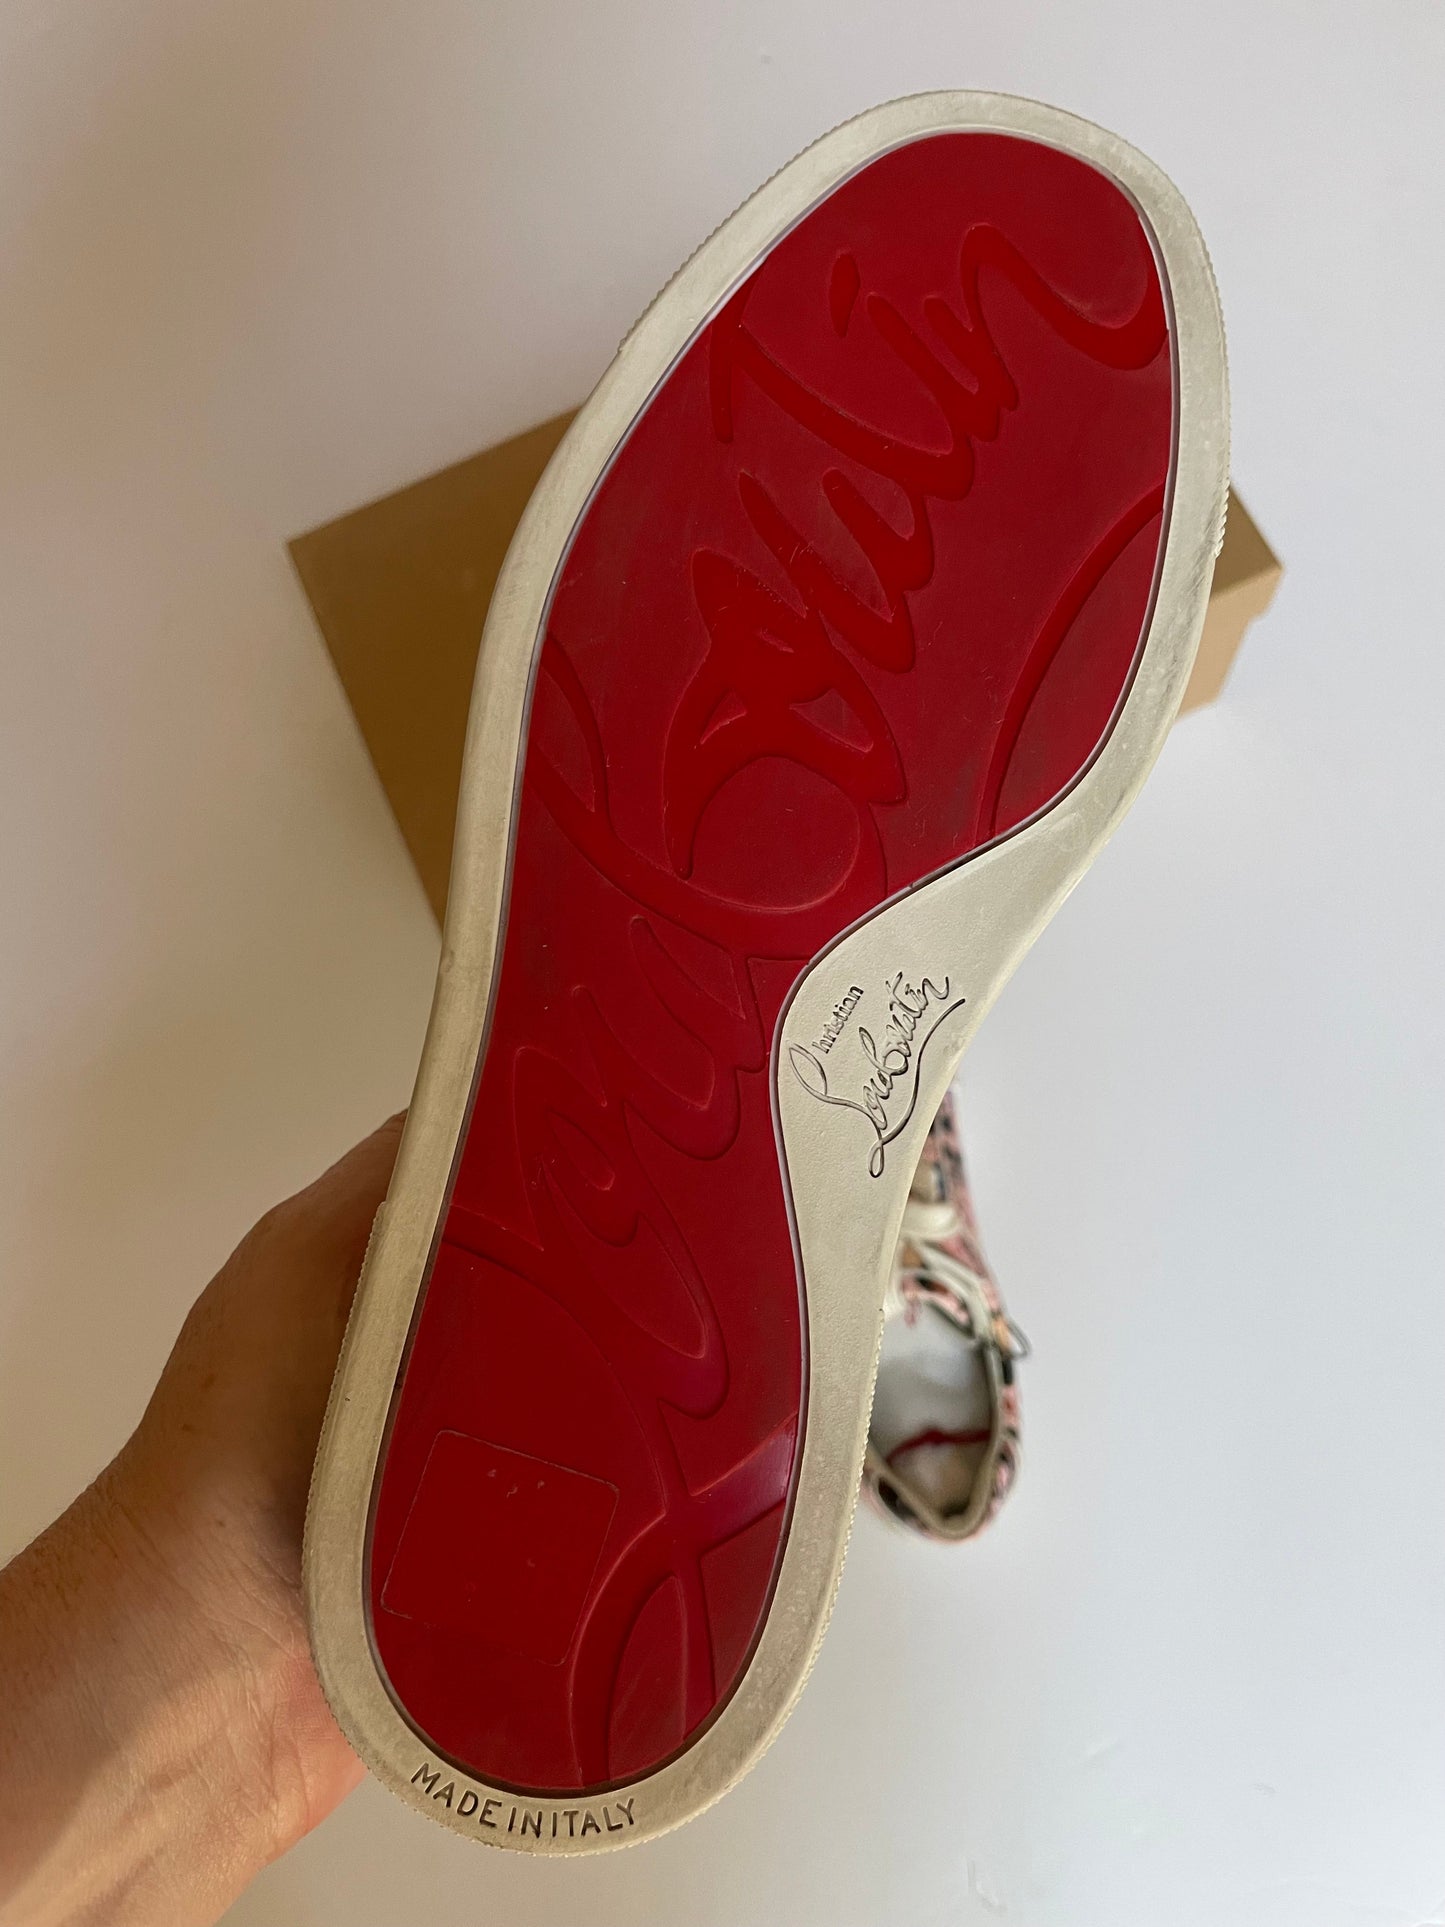 Multi-colored Shoes Sneakers Christian Louboutin, Size 6